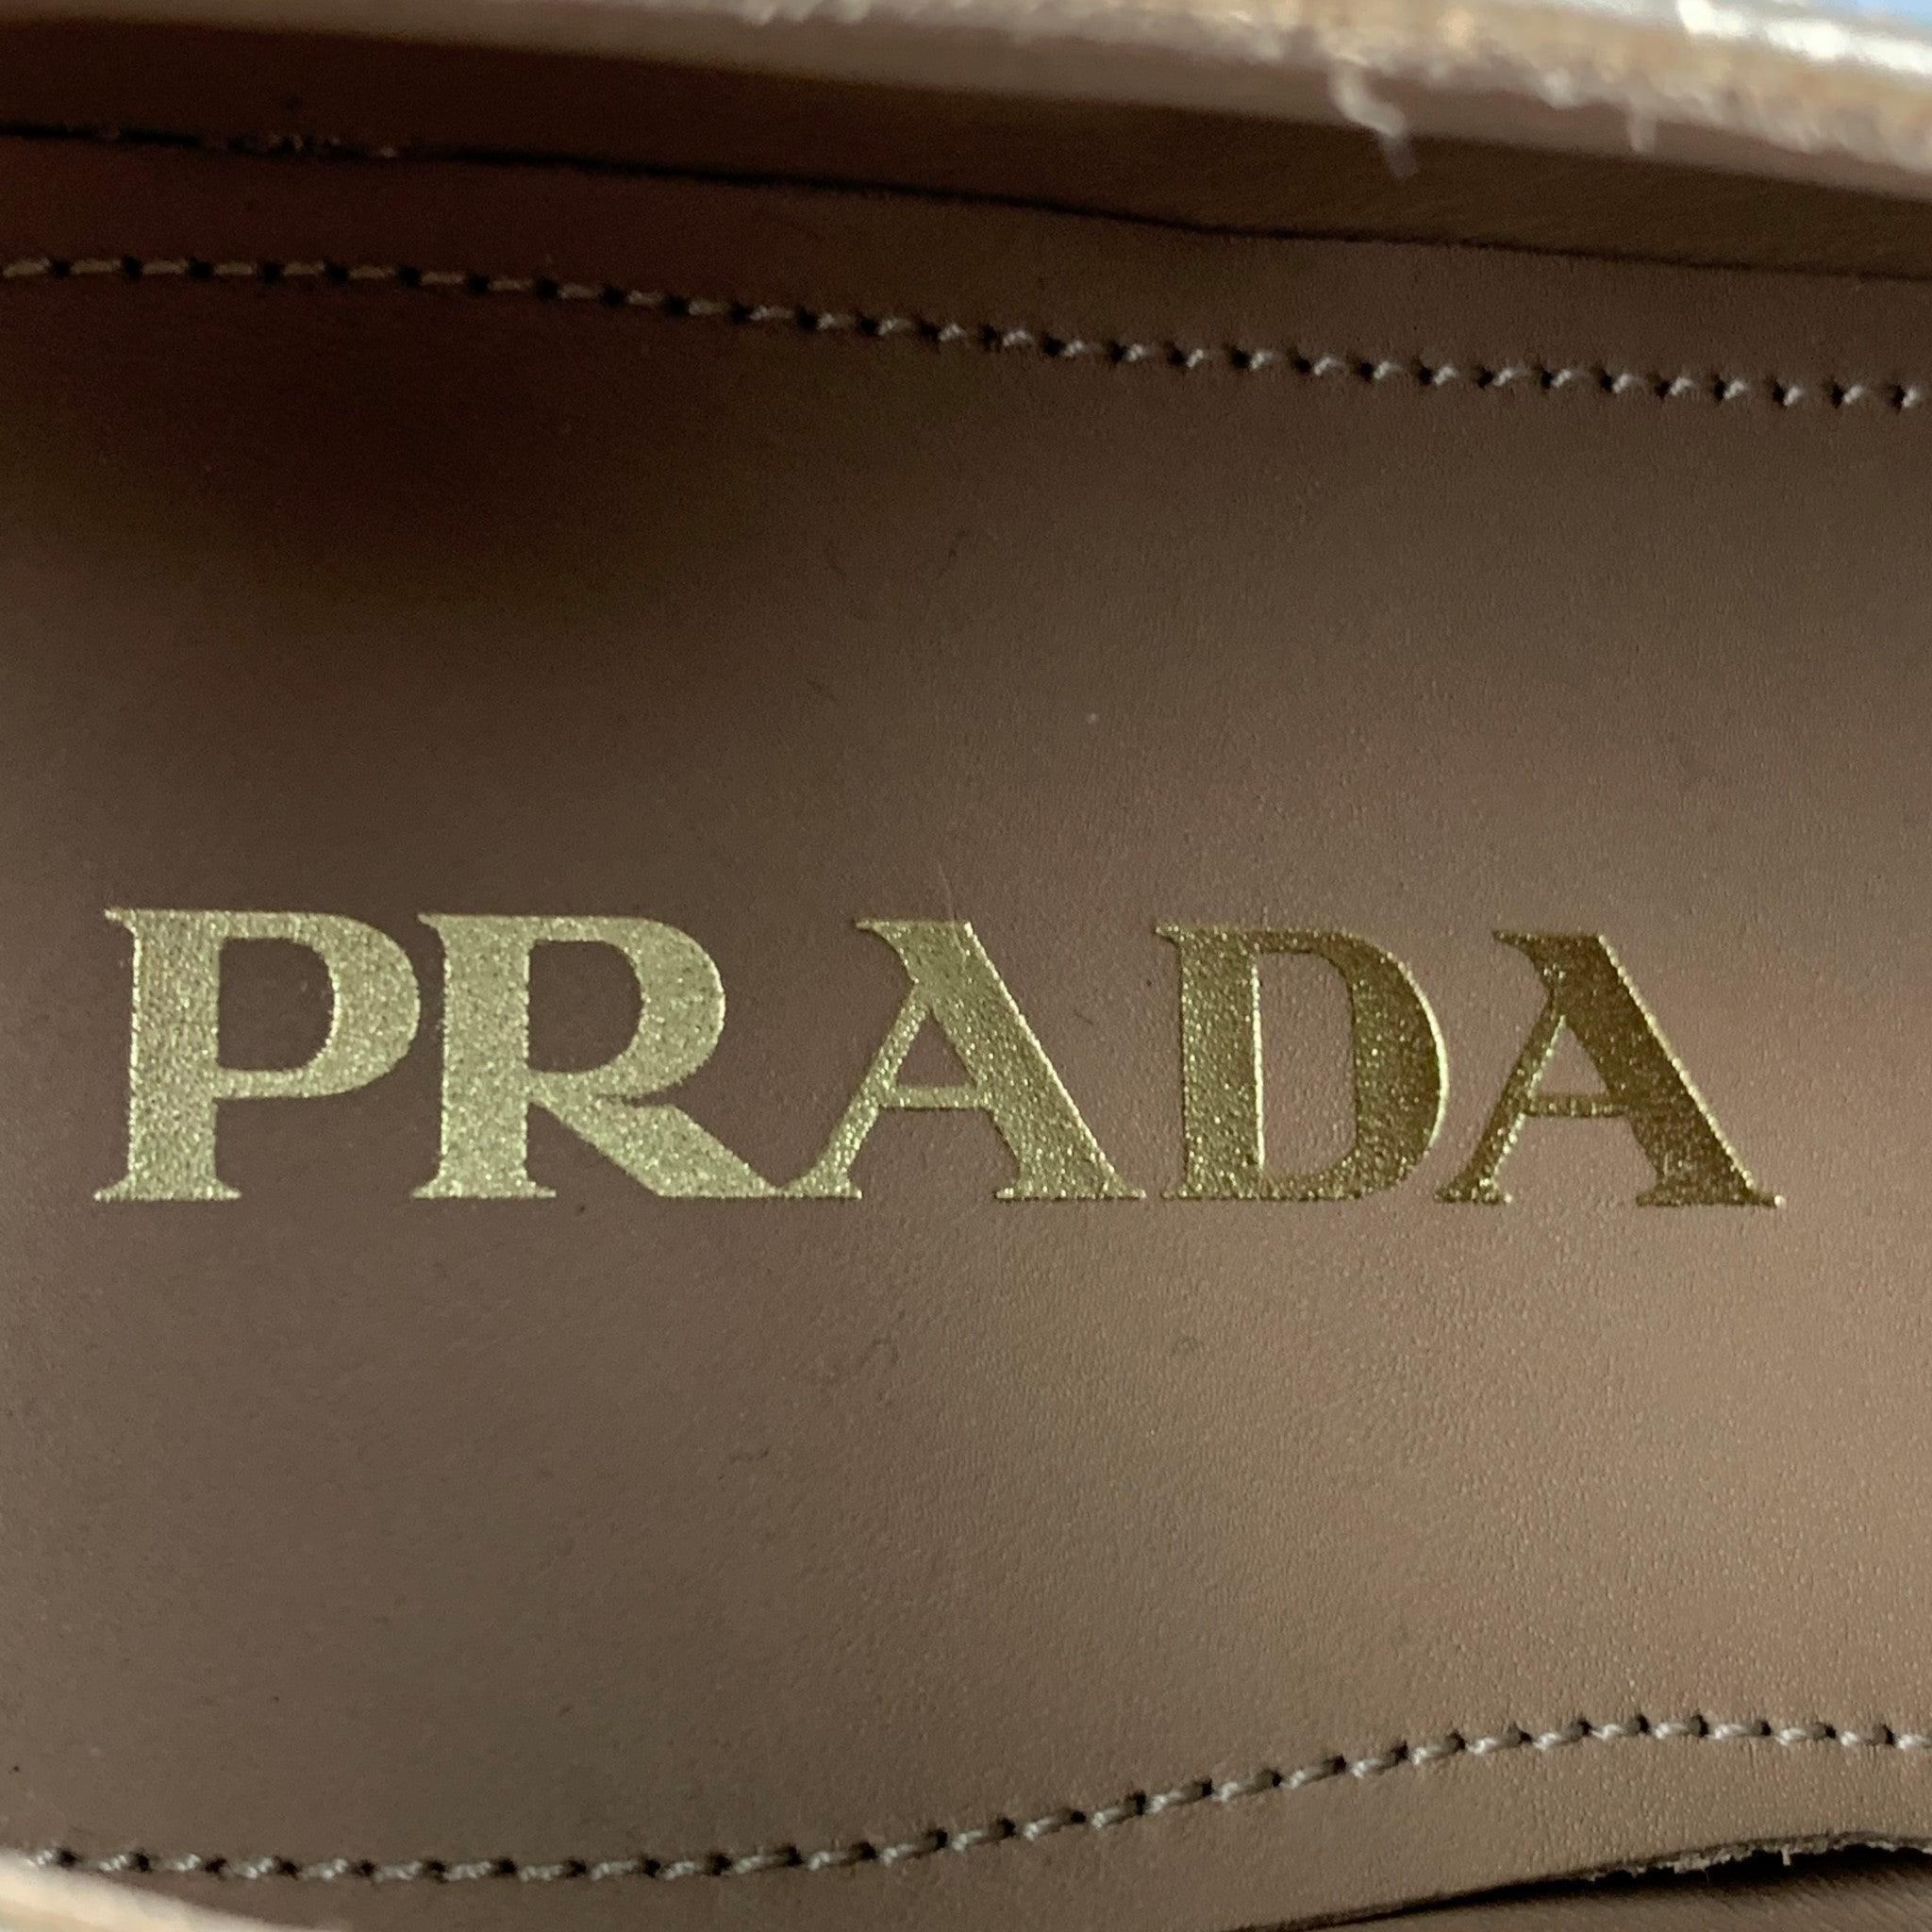 PRADA Size 6.5 Gold Leather Perforated Wingtip Lace Up Shoes For Sale 3